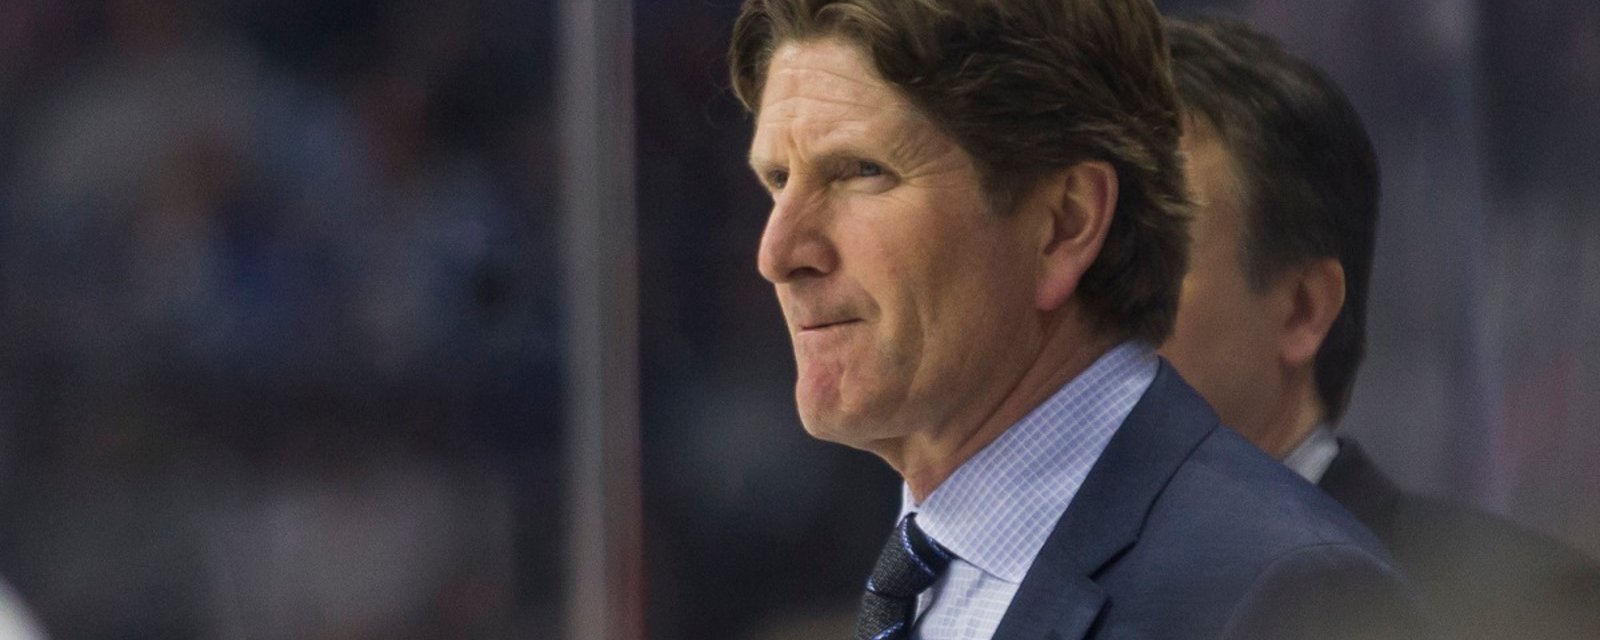 Leafs coach Mike Babcock and his players comment on anthem controversy.